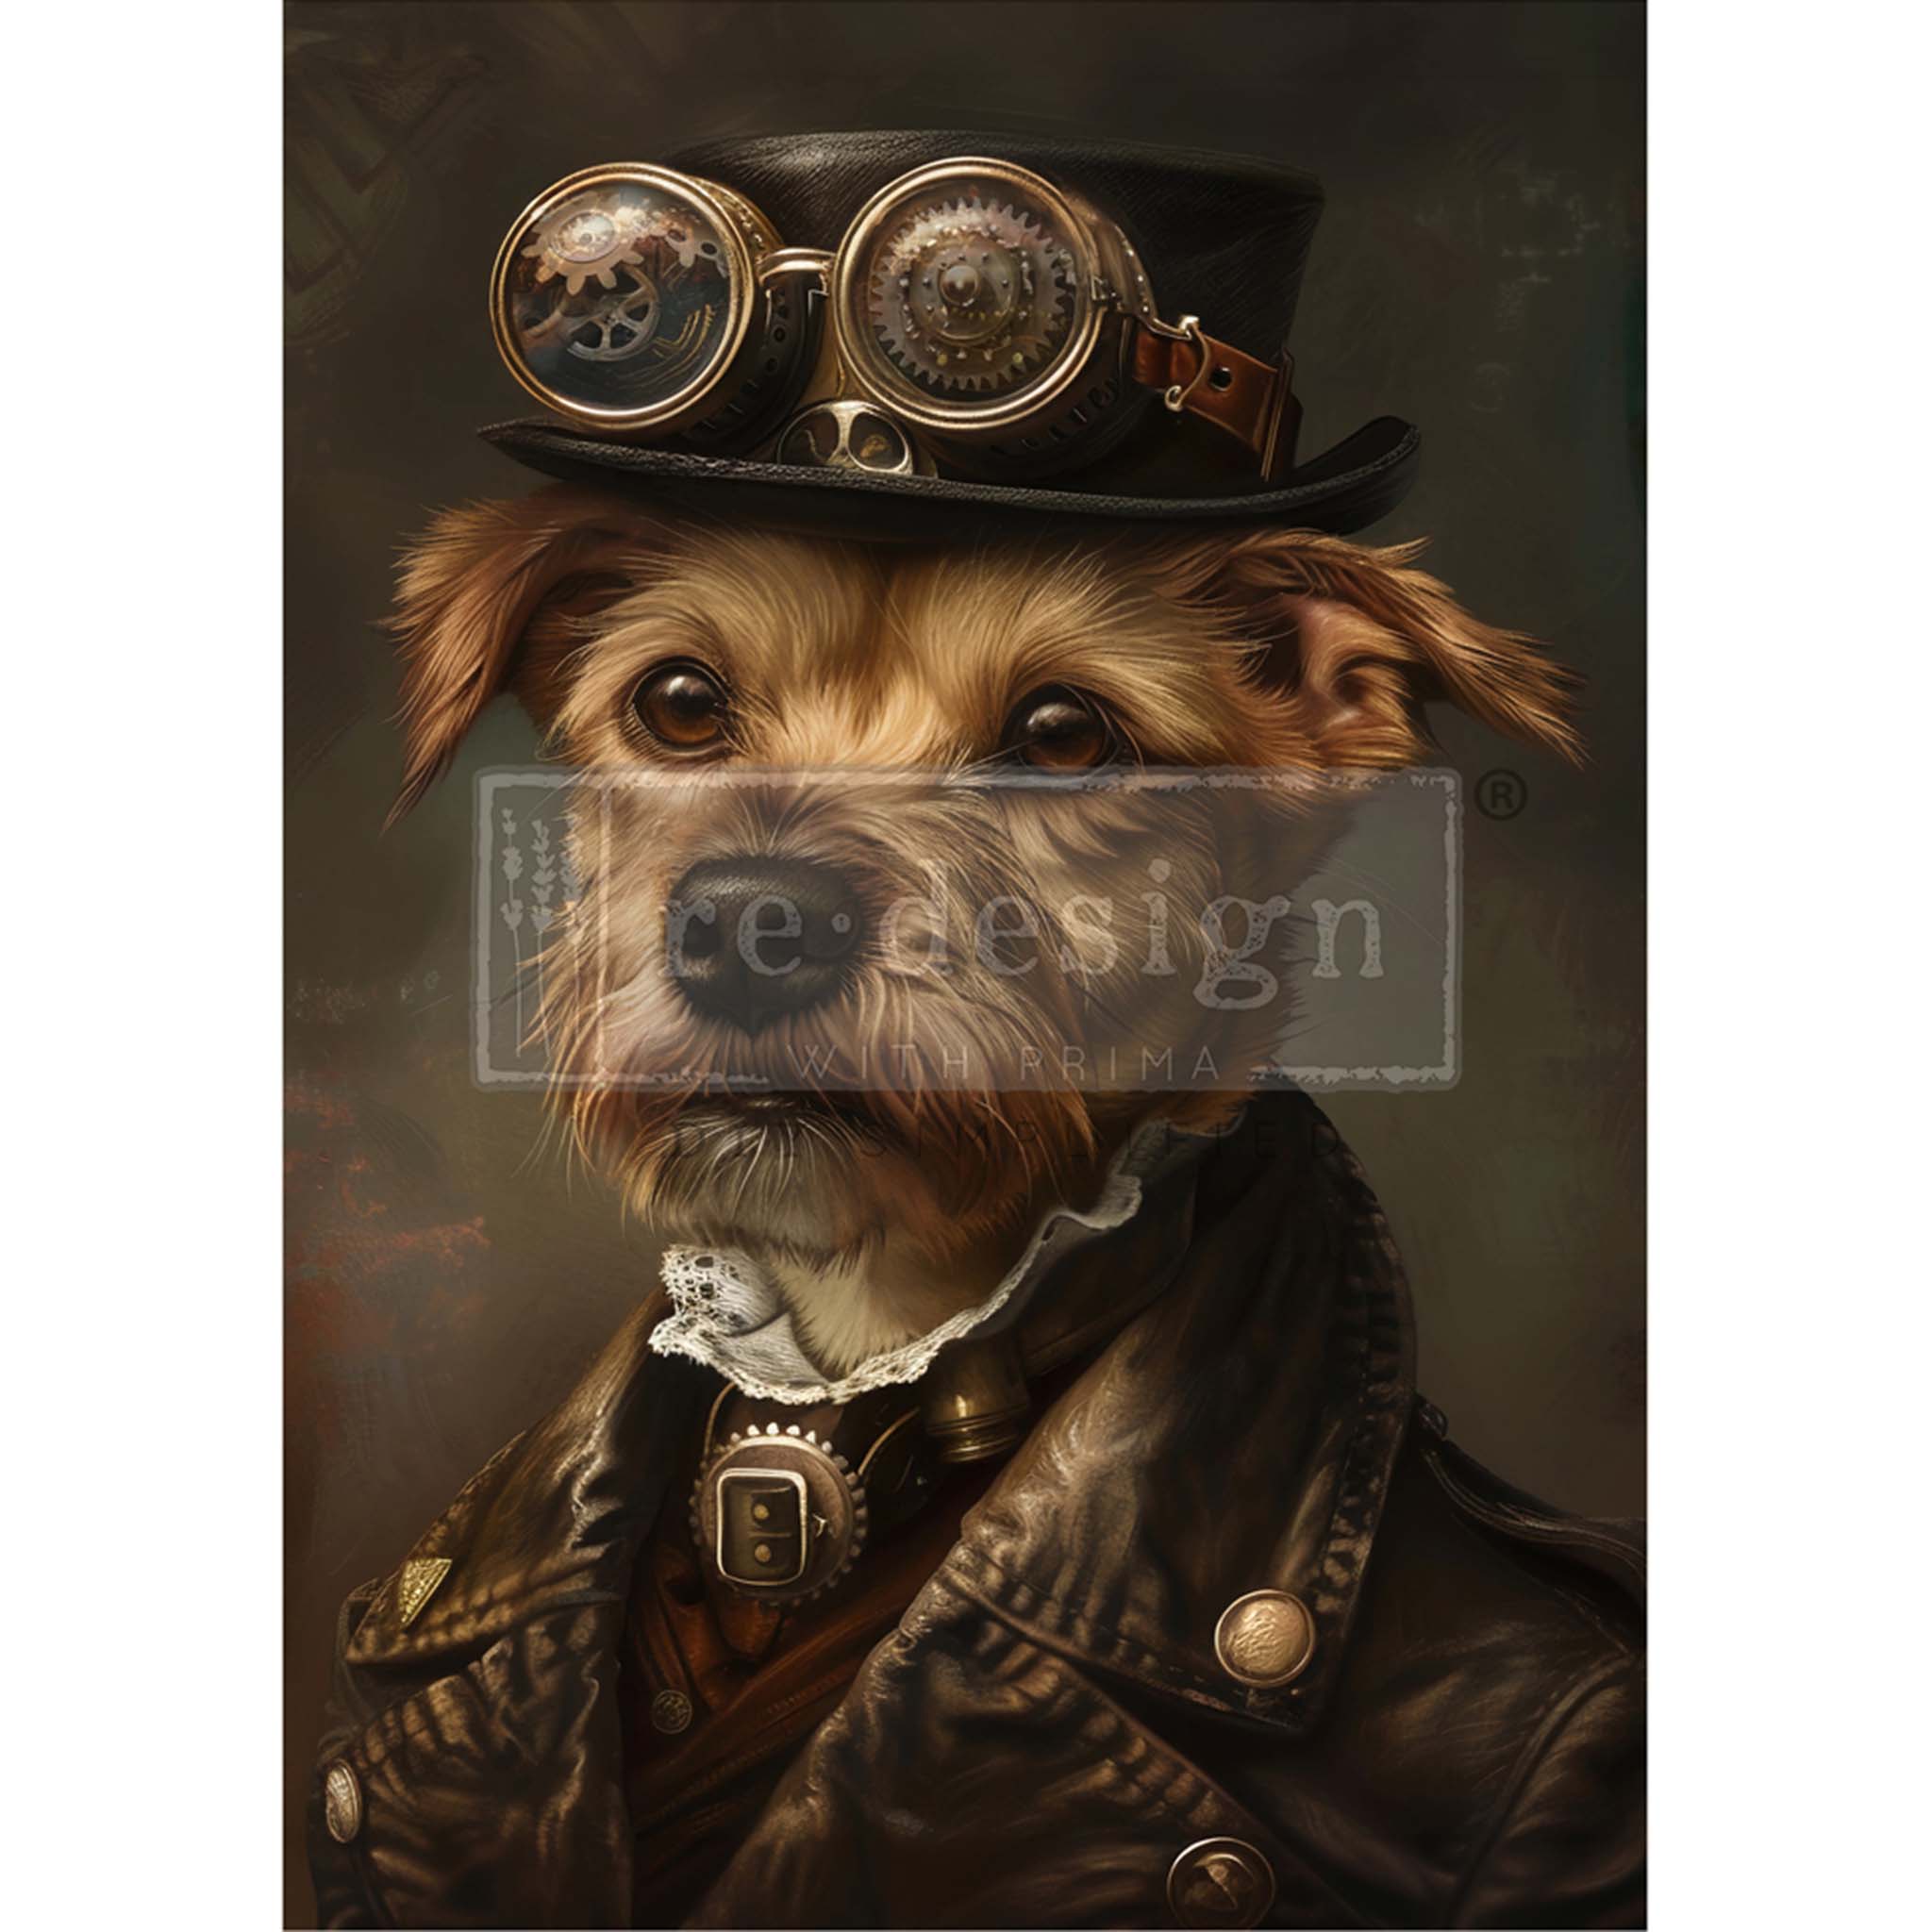 A1 fiber paper that features an adorable brown dog sporting a top hat with goggles and suit in a steampunk design. White borders are on the sides.